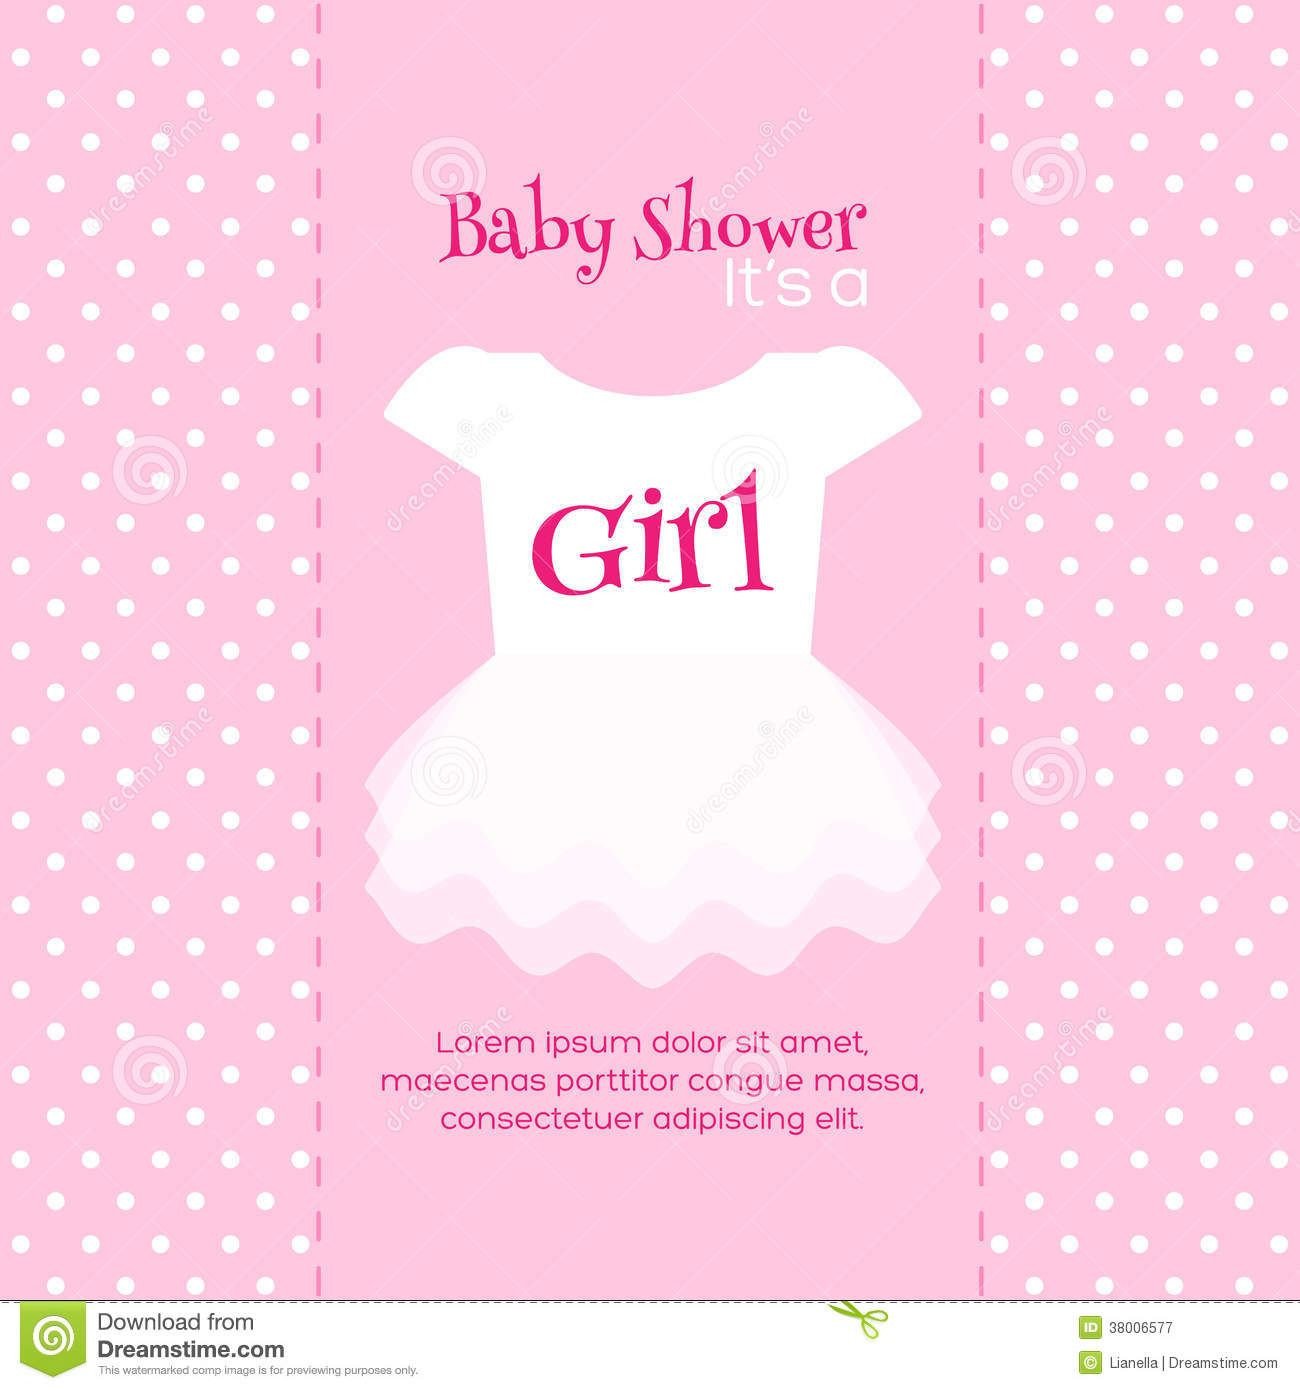 Baby Shower Card Template Design Free Printable Baby Shower Invitations for Girls